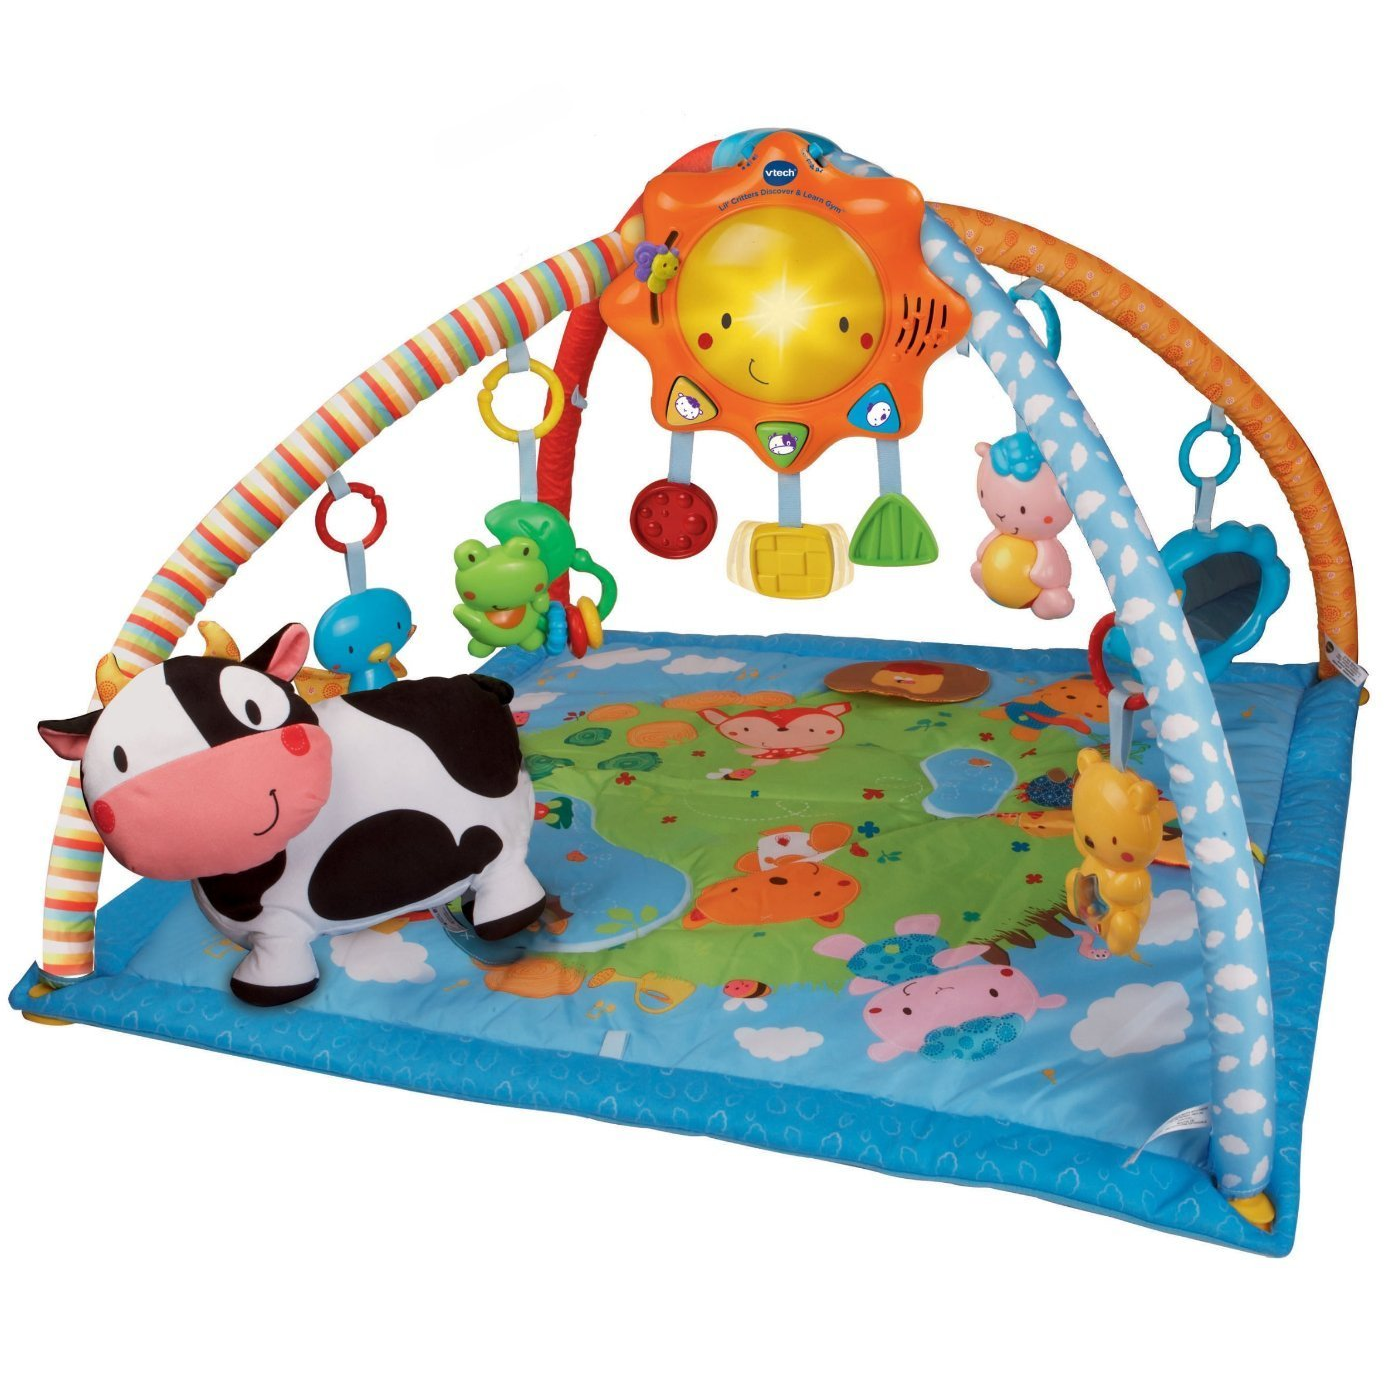 VTech Baby Line Lil’ Critters Discover and Learn Gym Only $27.51! (Reg $49.99)